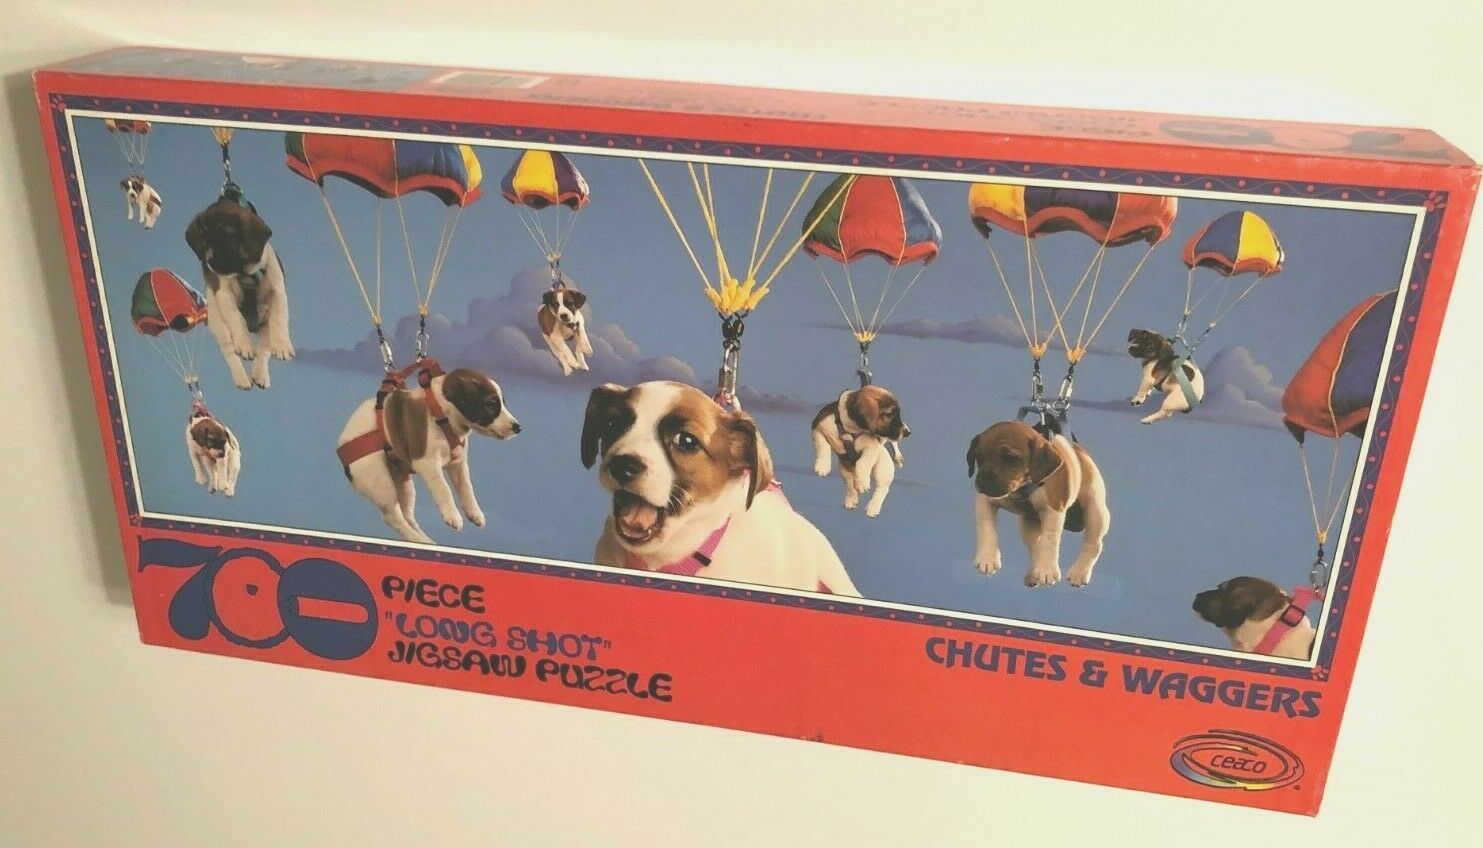 Primary image for 1998 Ceaco Parachute Chutes Waggers Long Shot Miller Allan 700 Pcs Puzzle New